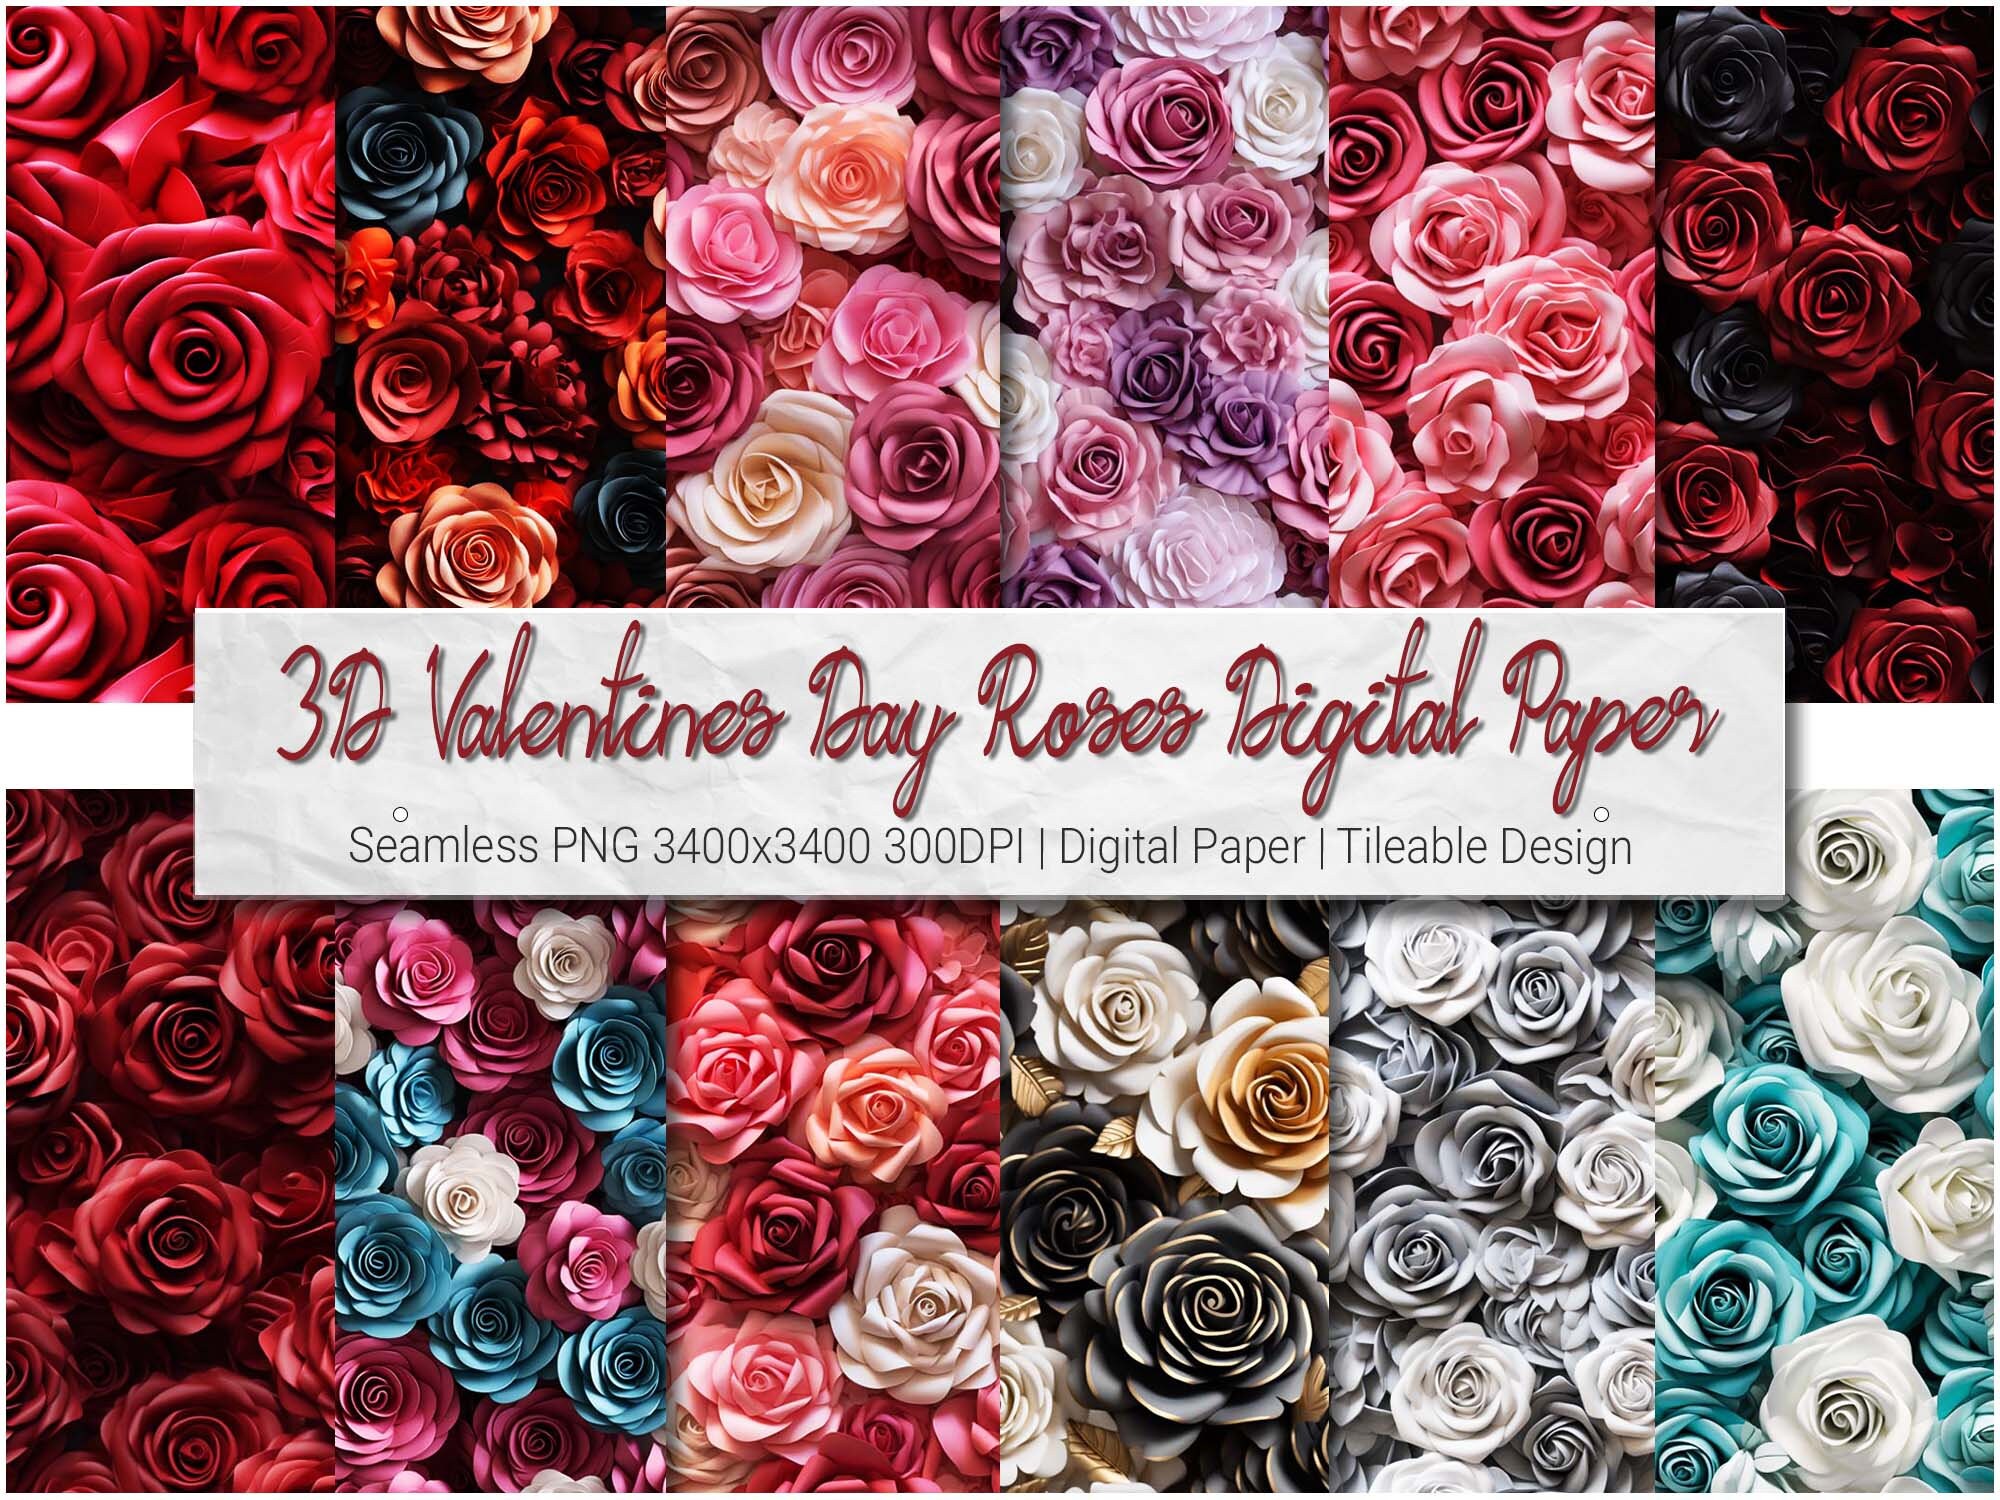 Elegant Red Floral Wrapping Paper Sheets